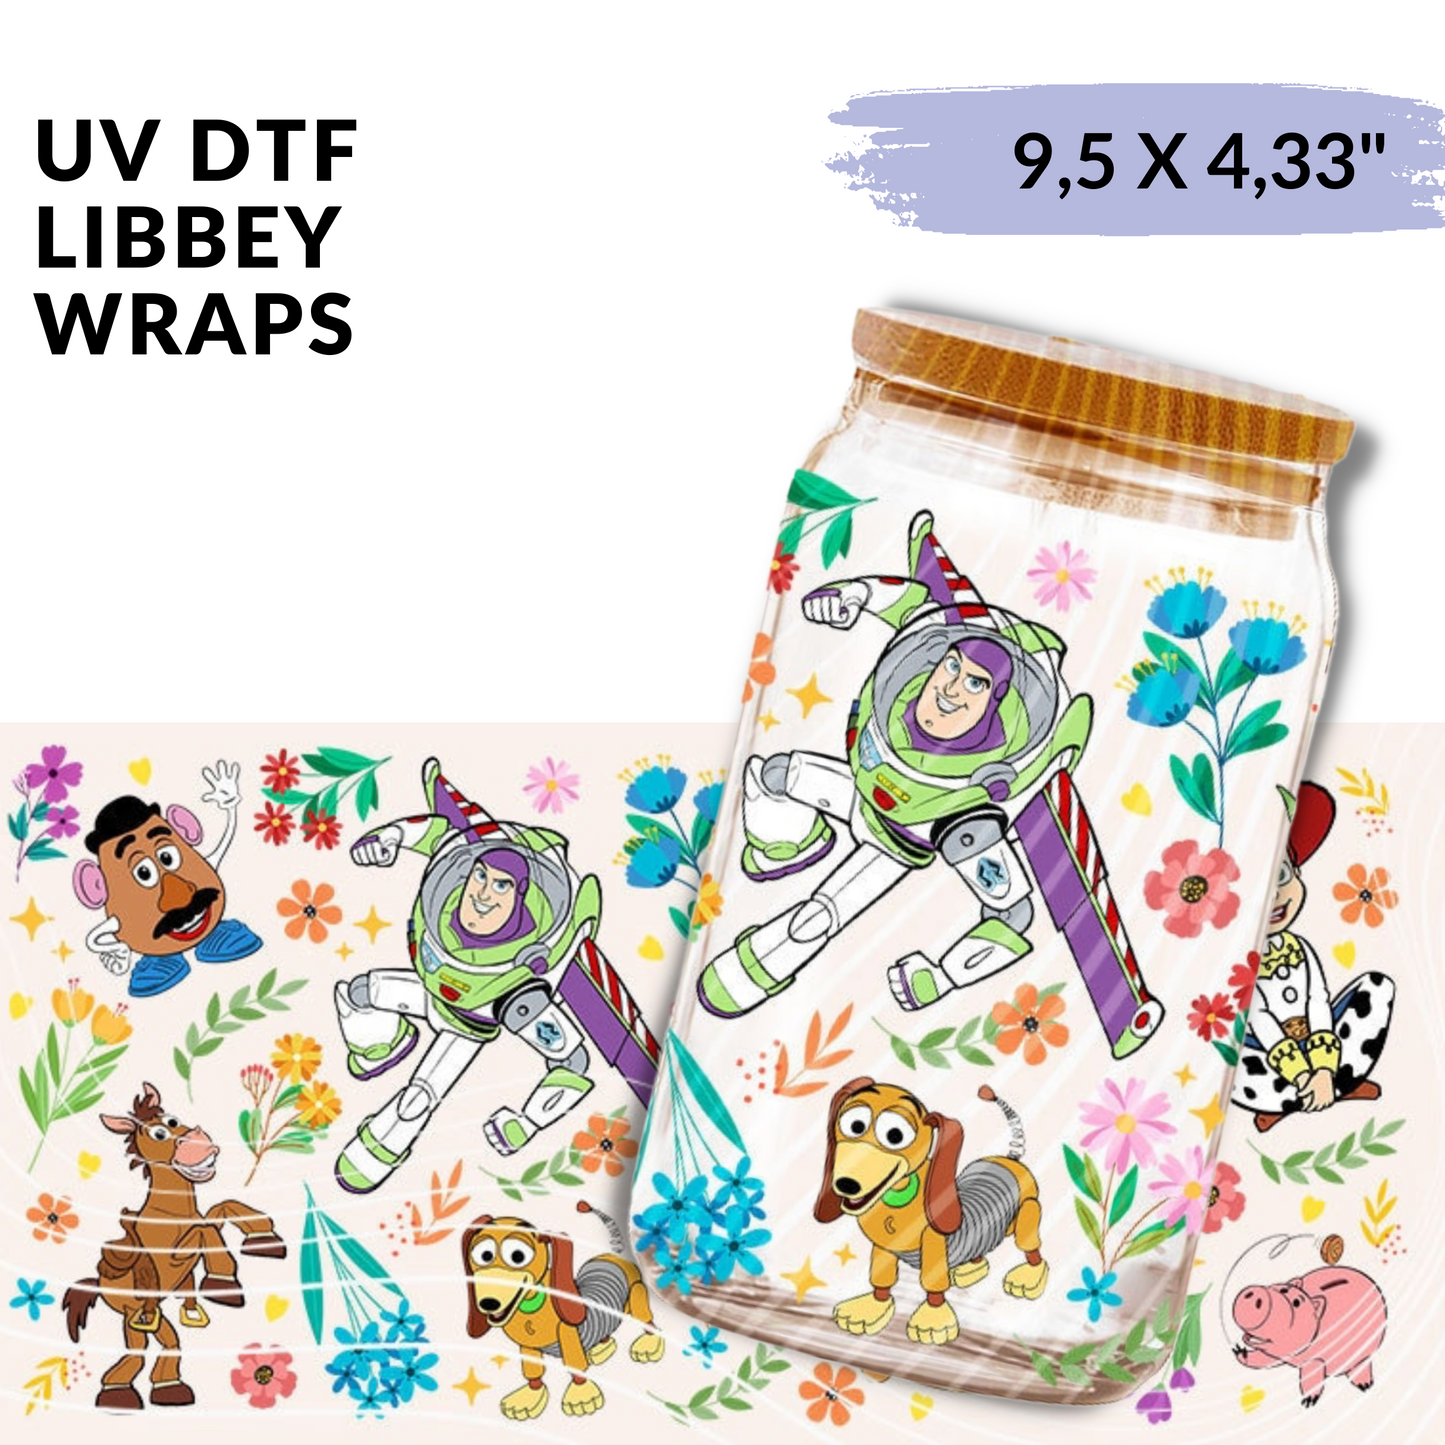 UV DTF - Caricaturas Cuchis Libbey cup Wrap